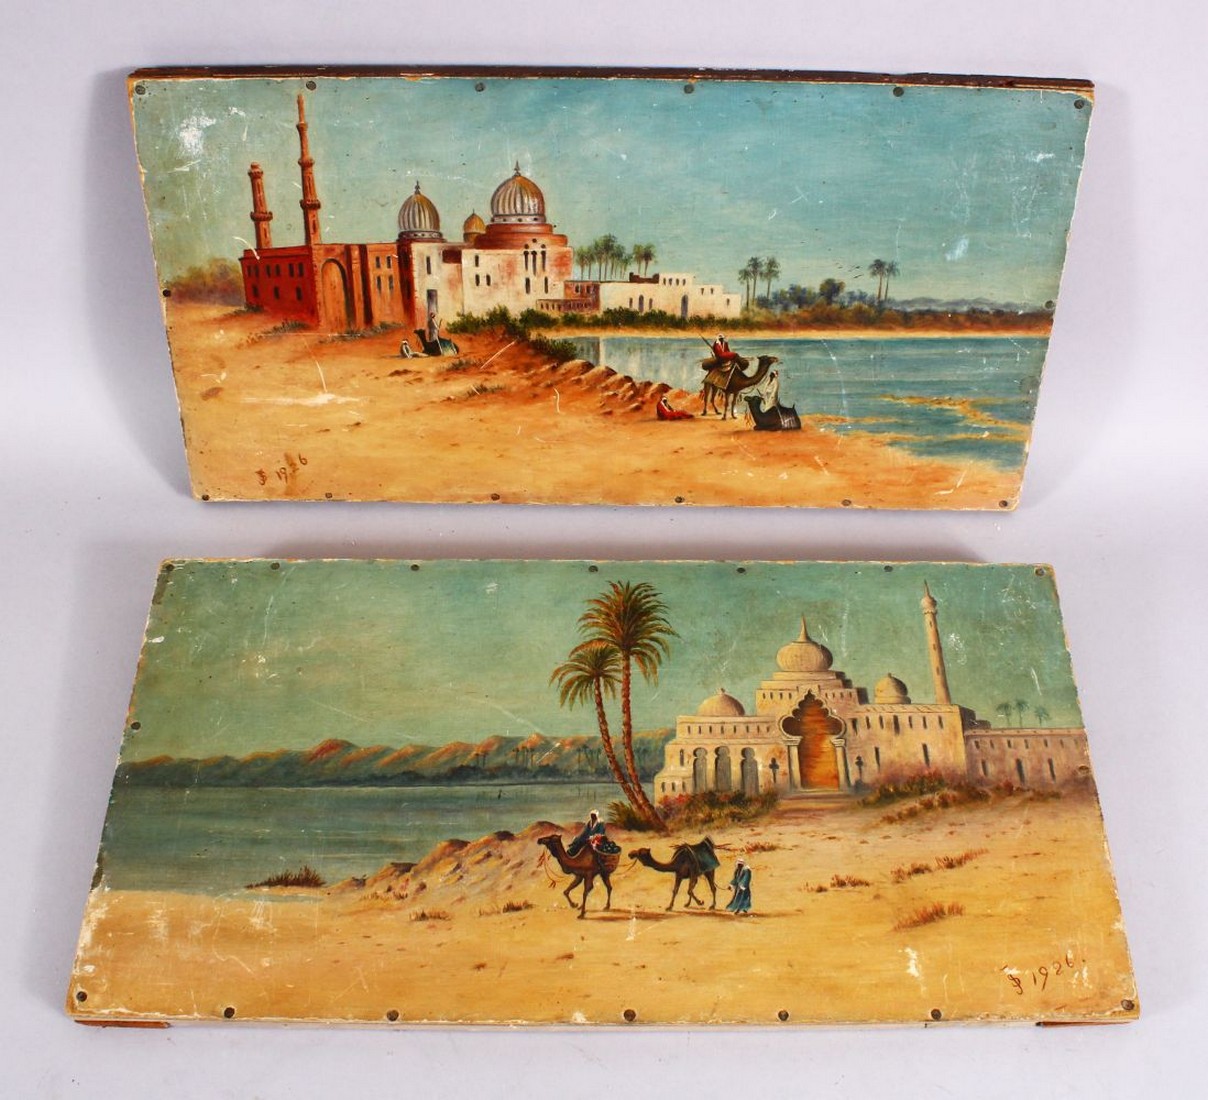 A PAIR OF 20TH CENTURY ISLAMIC ORIENTALIST PAINTING ON WOOD, each depicting a native waterside